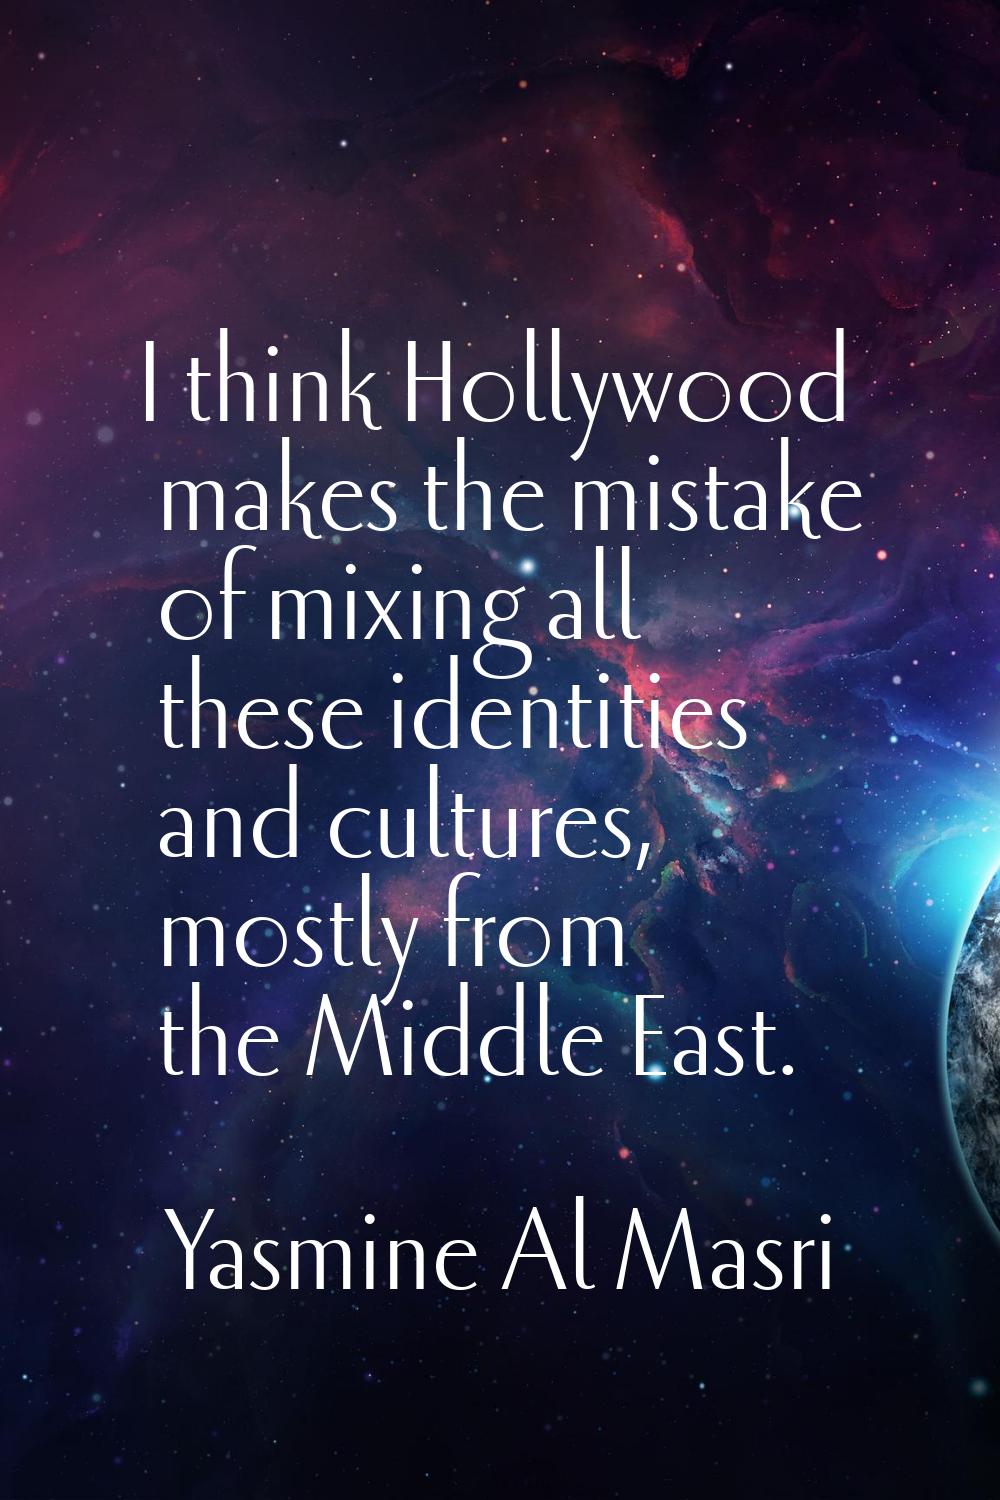 I think Hollywood makes the mistake of mixing all these identities and cultures, mostly from the Mi